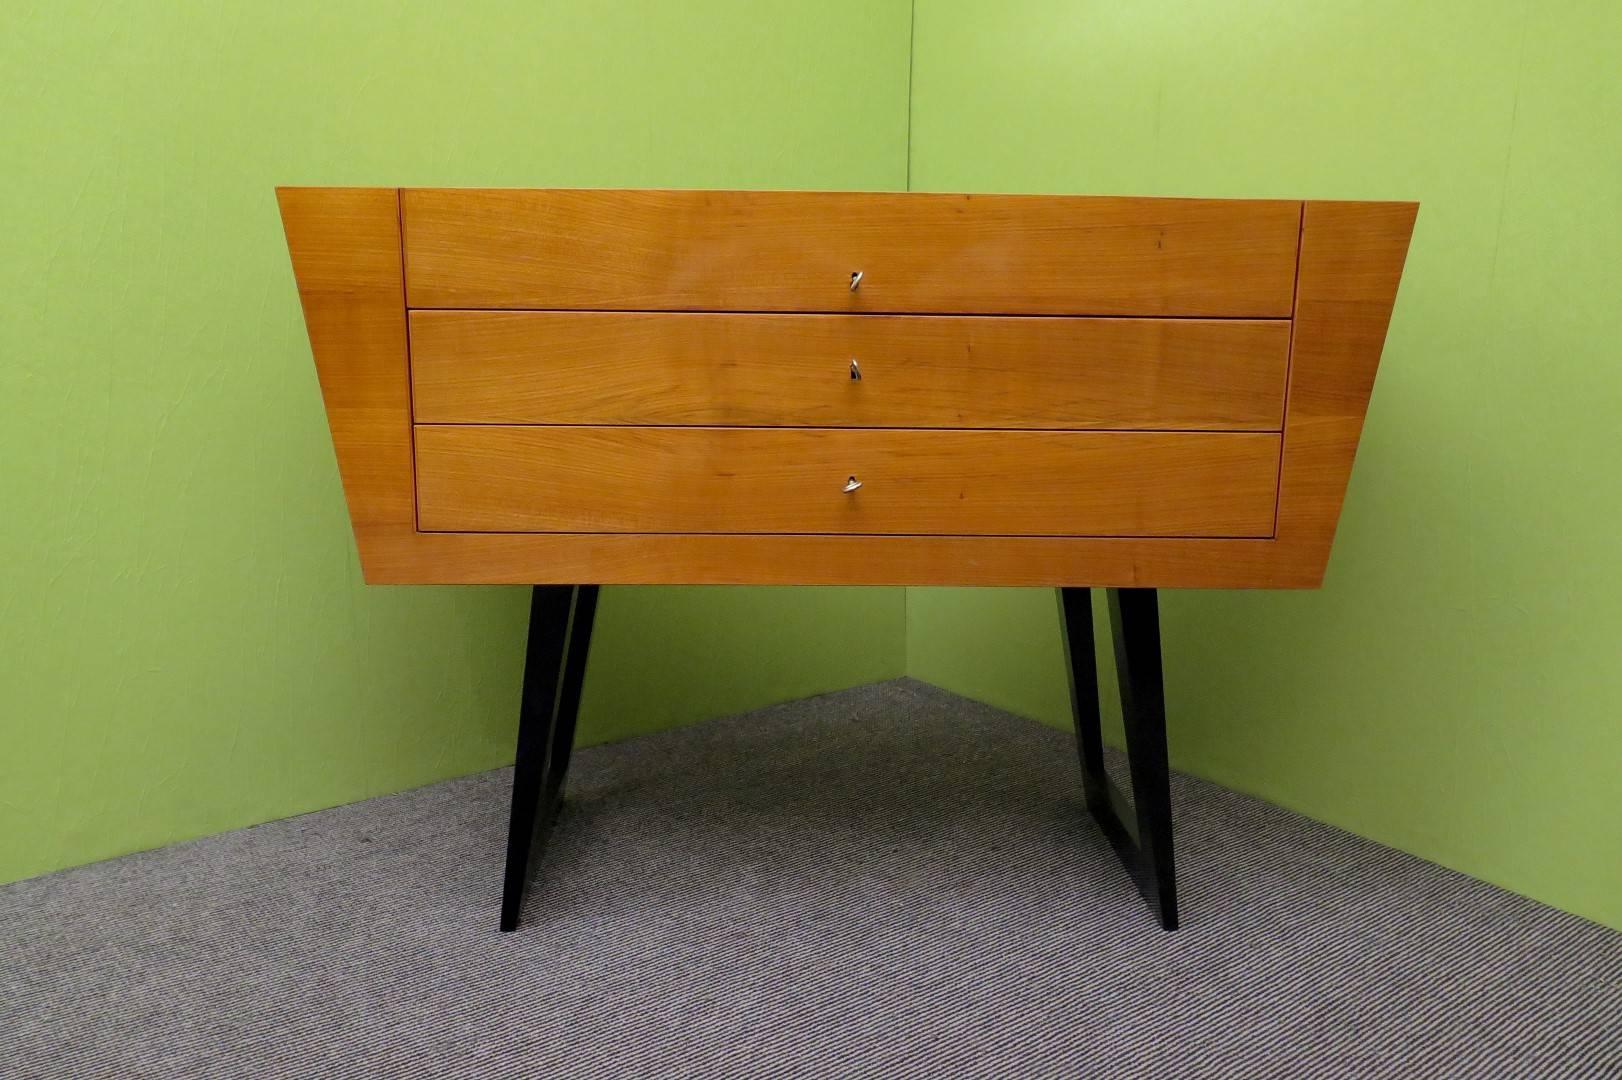 Italian chest of drawers, from the mid-20th century. Peculiar shape, original and avant-garde for that time period. A very basic design, but by far an stylish dresser.

All veneered in cherrywood, with three drawers. The top is slightly recessed